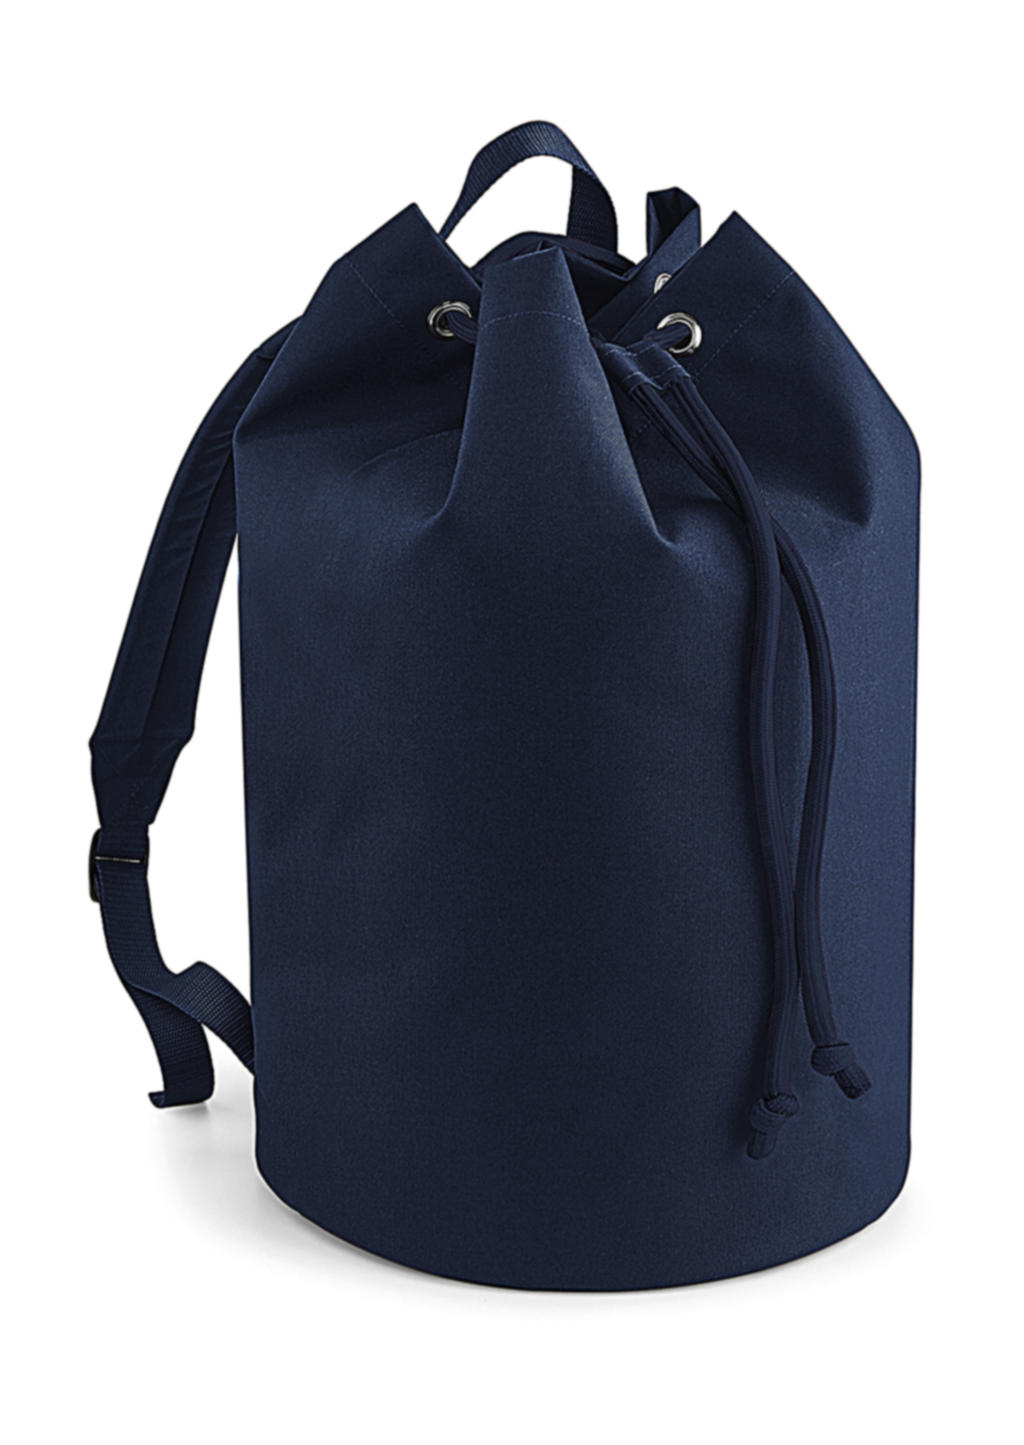  Original Drawstring Backpack in Farbe French Navy